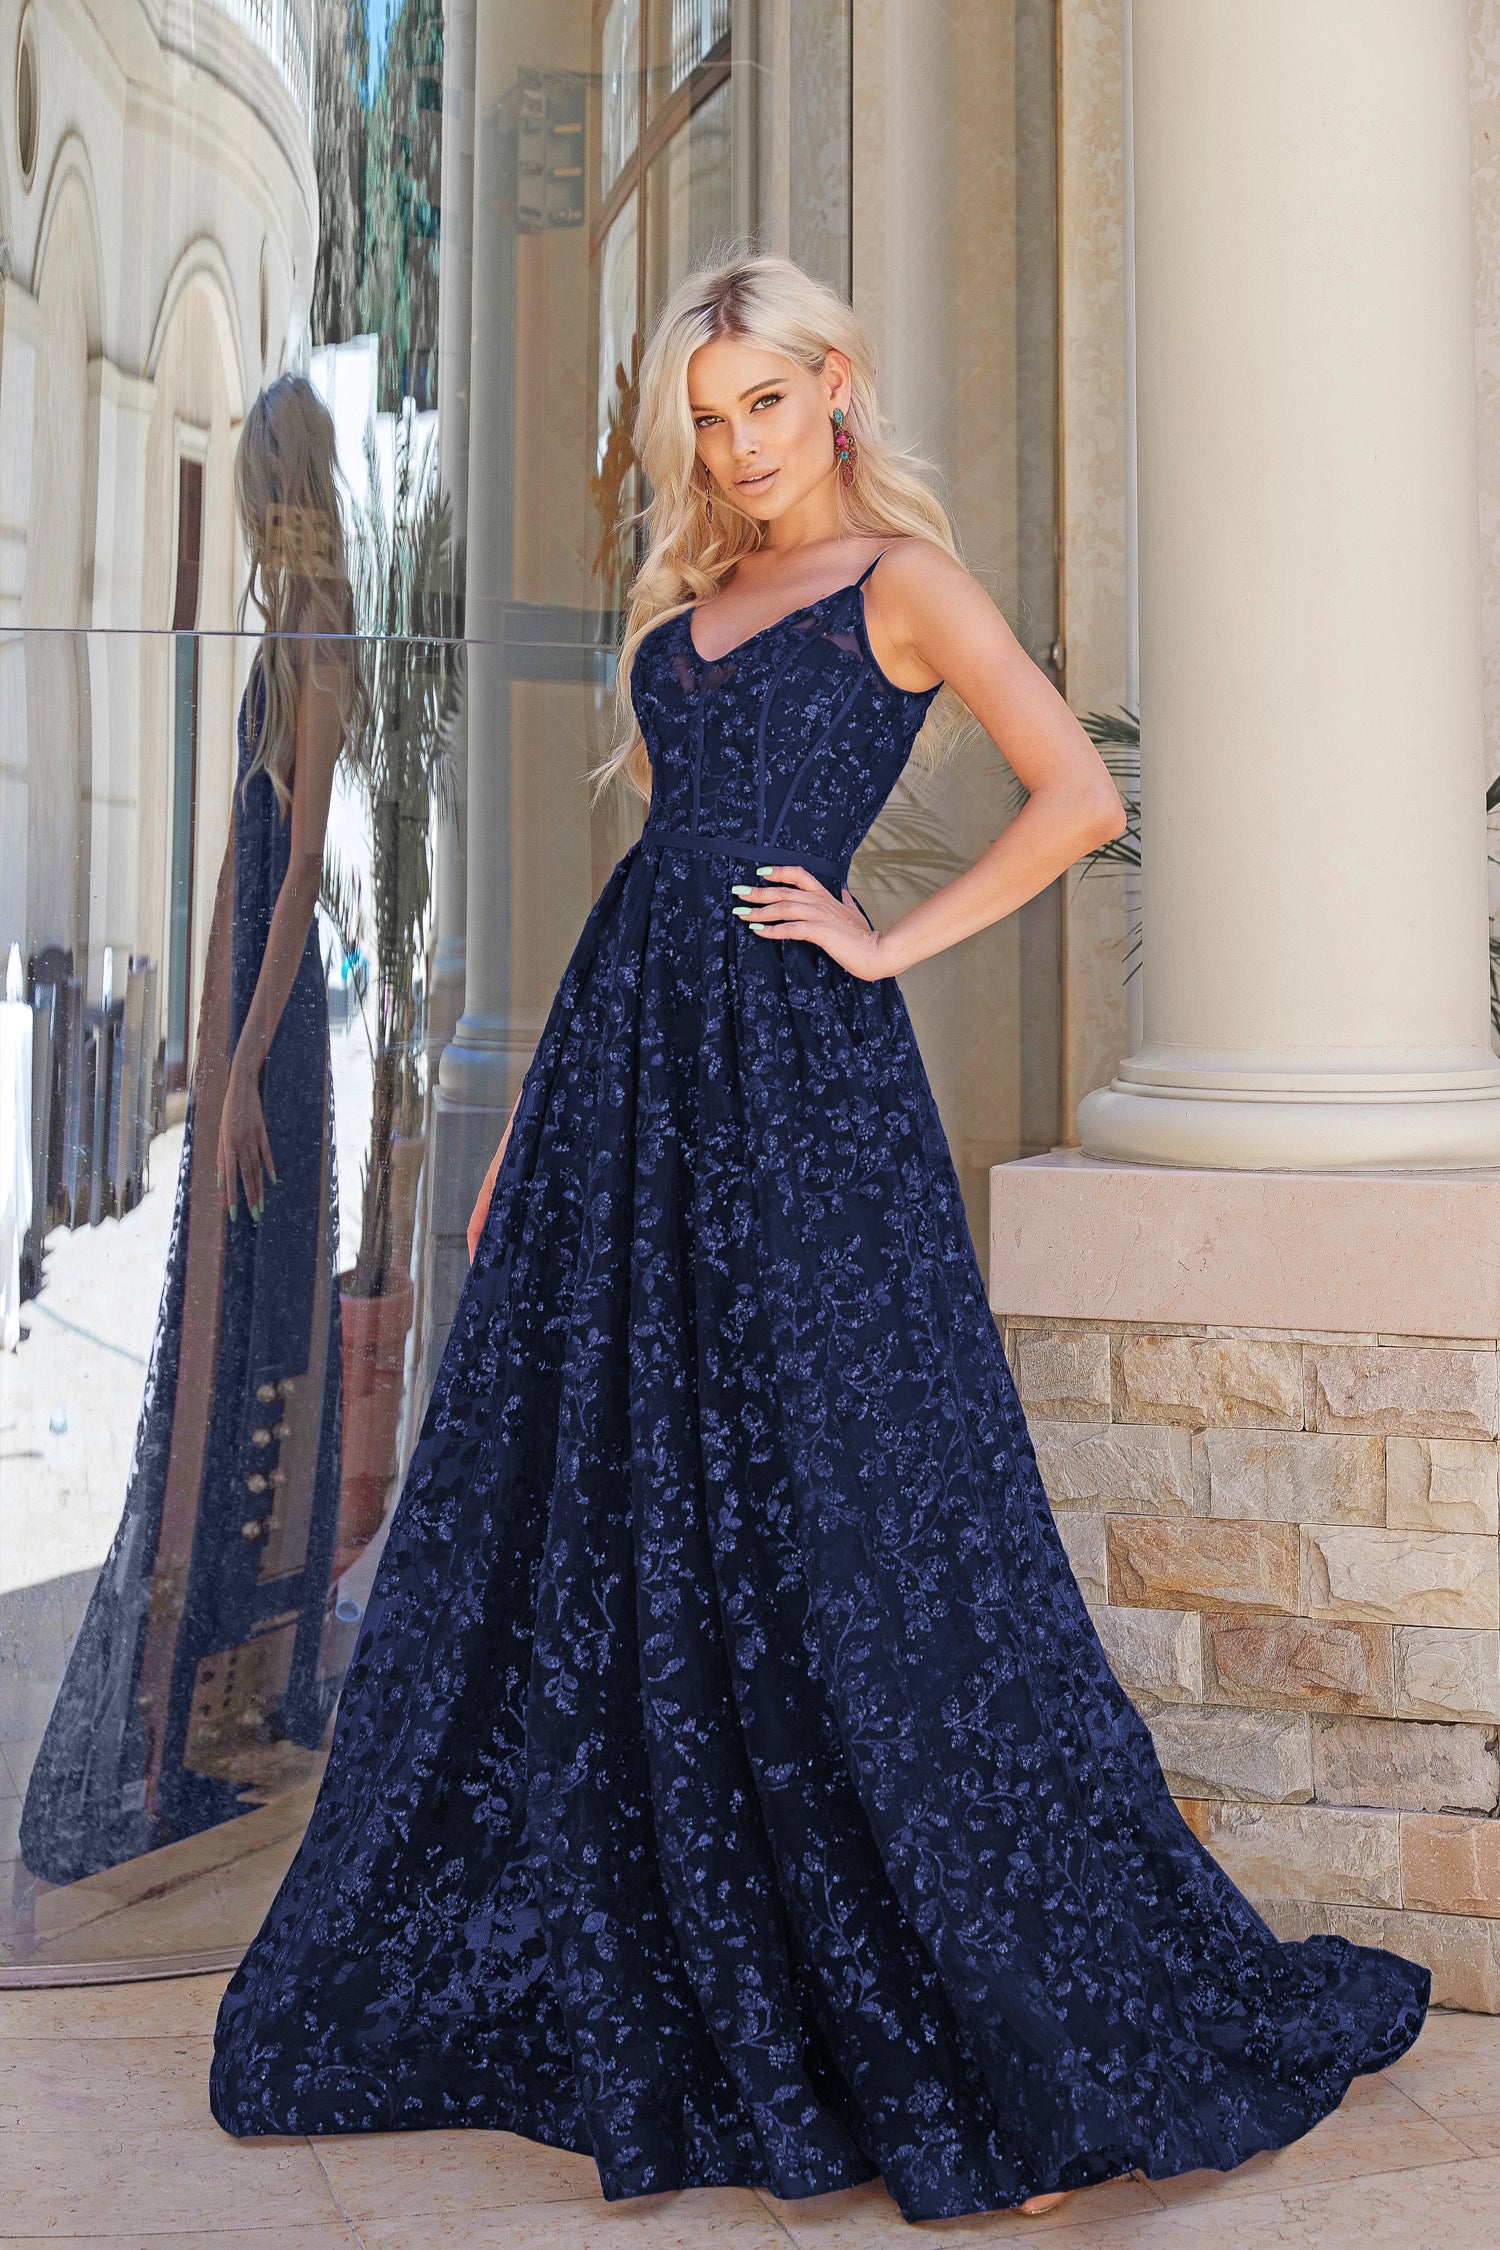 Tina Holly Couture TK069 Navy 3D Sequin A-line Plunging Neckline Formal Dress